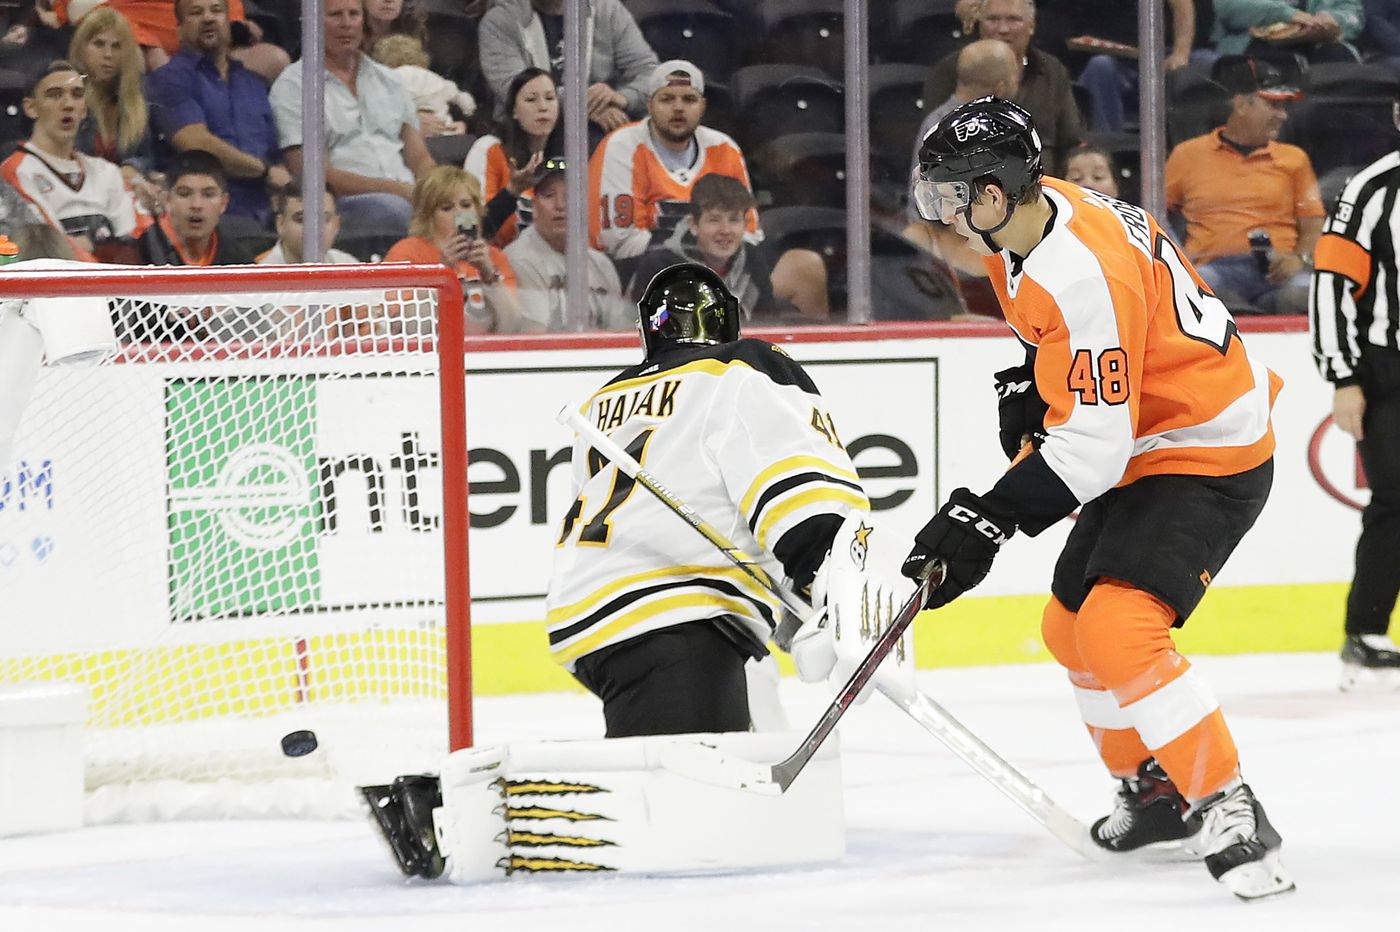 Morgan Frost gives strong showing, but Flyers lose to Bruins 3-1 and stay winless in preseason